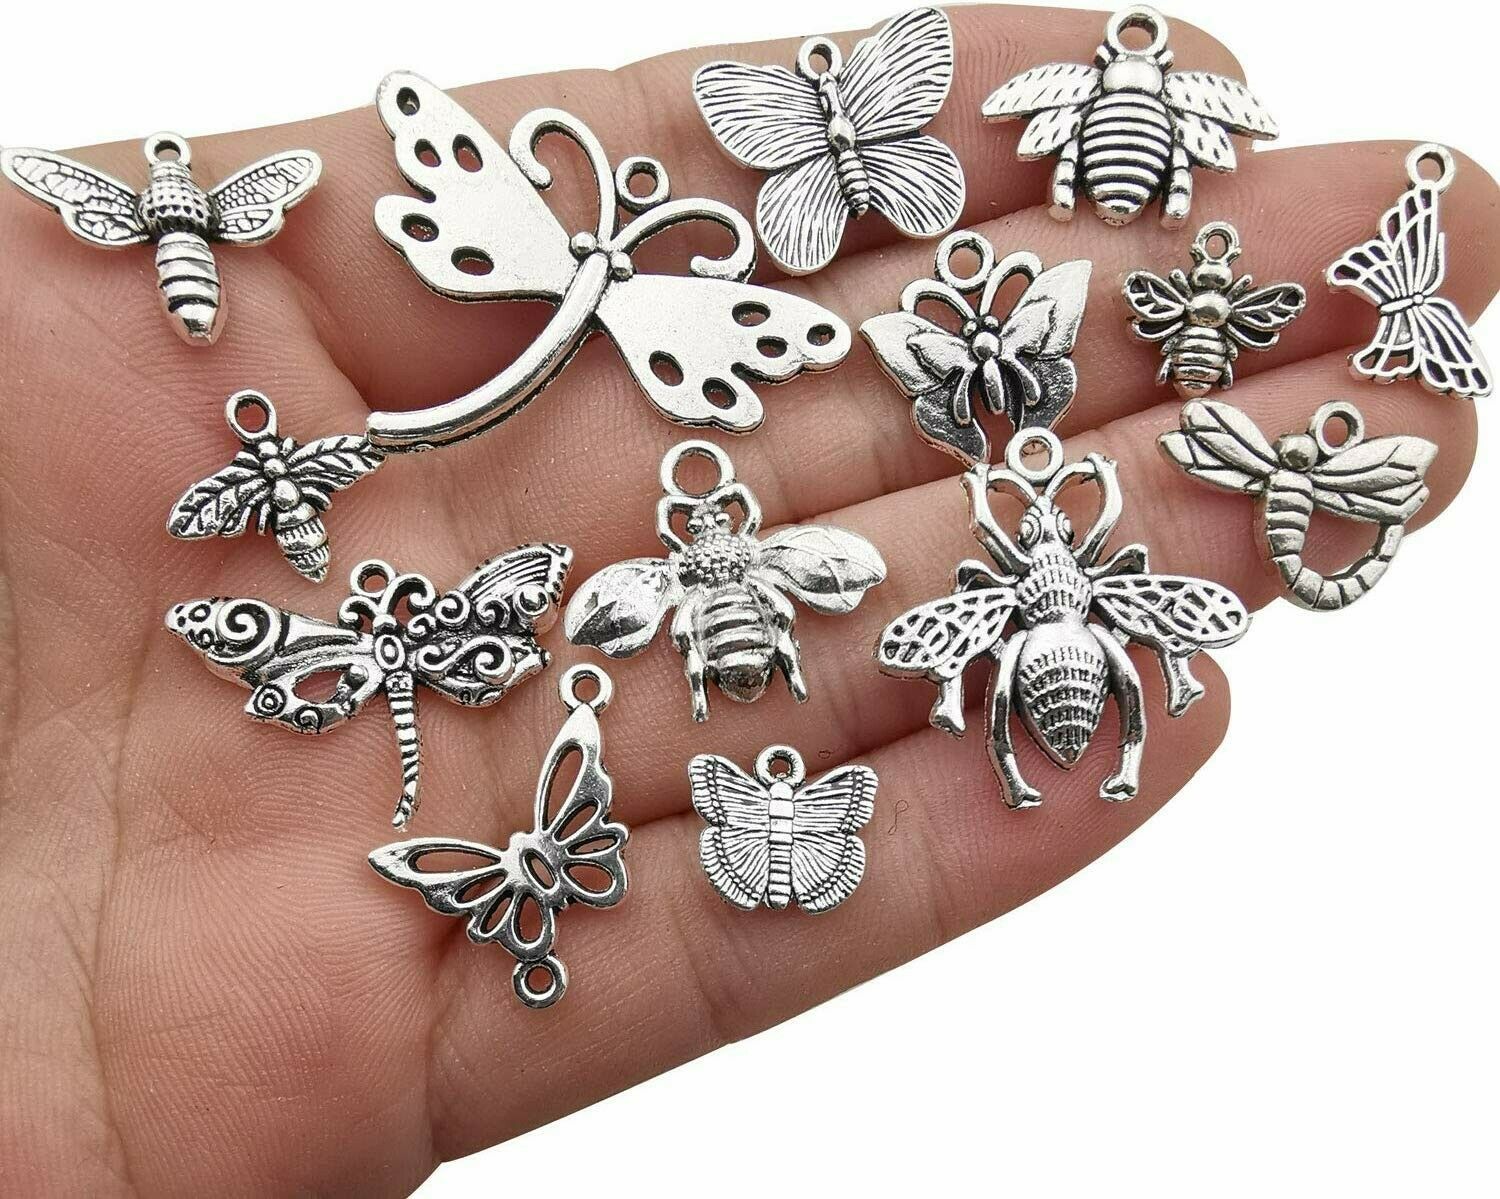 9 Bee Charms Butterfly Pendants Antiqued Silver Assorted Set Insect Wasp